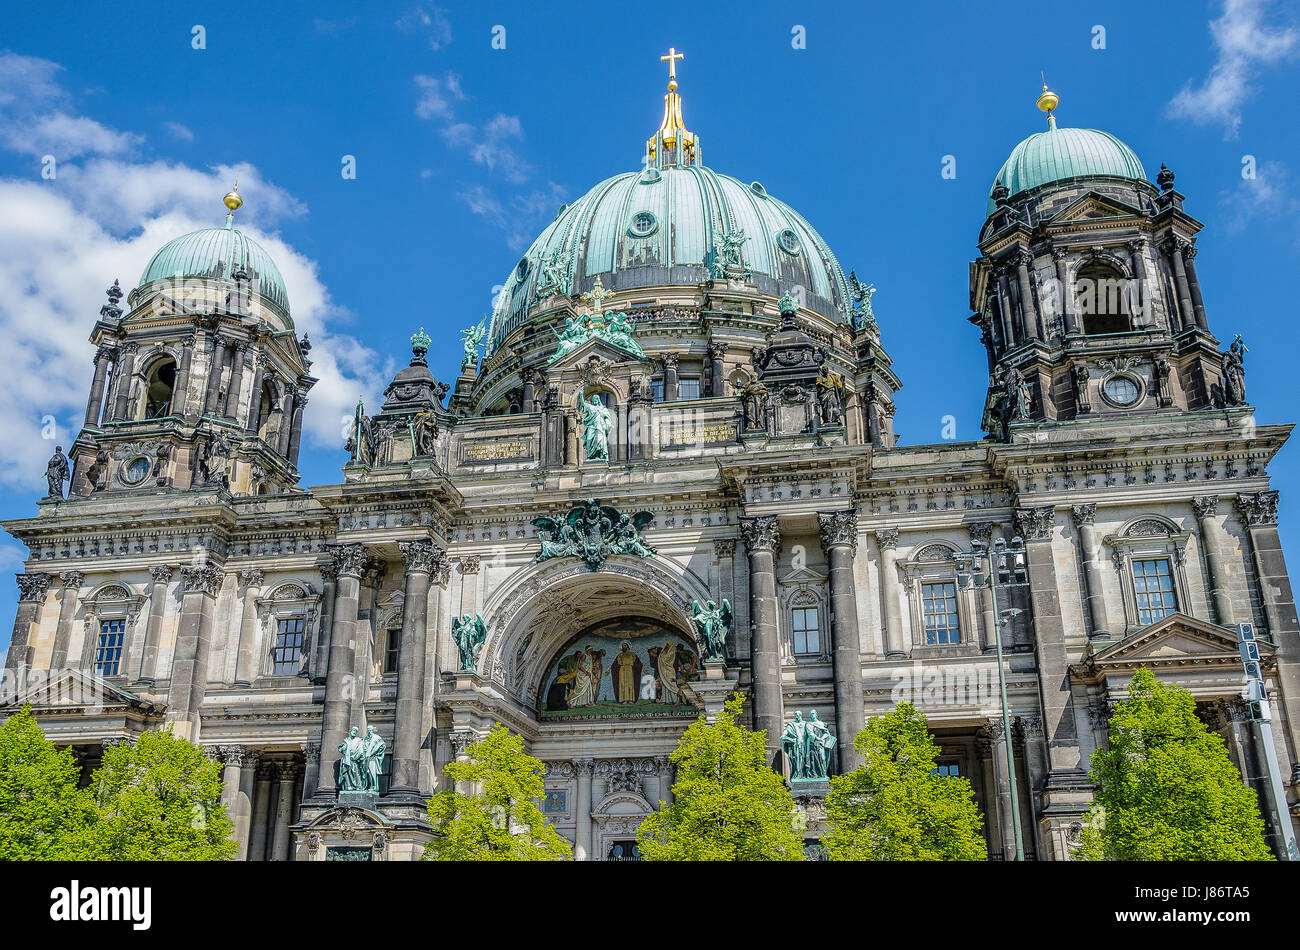 The Cathedral of Berlin is the largest church in the city, and it serves as a vital center for the Protestant church of Germany. Stock Photo